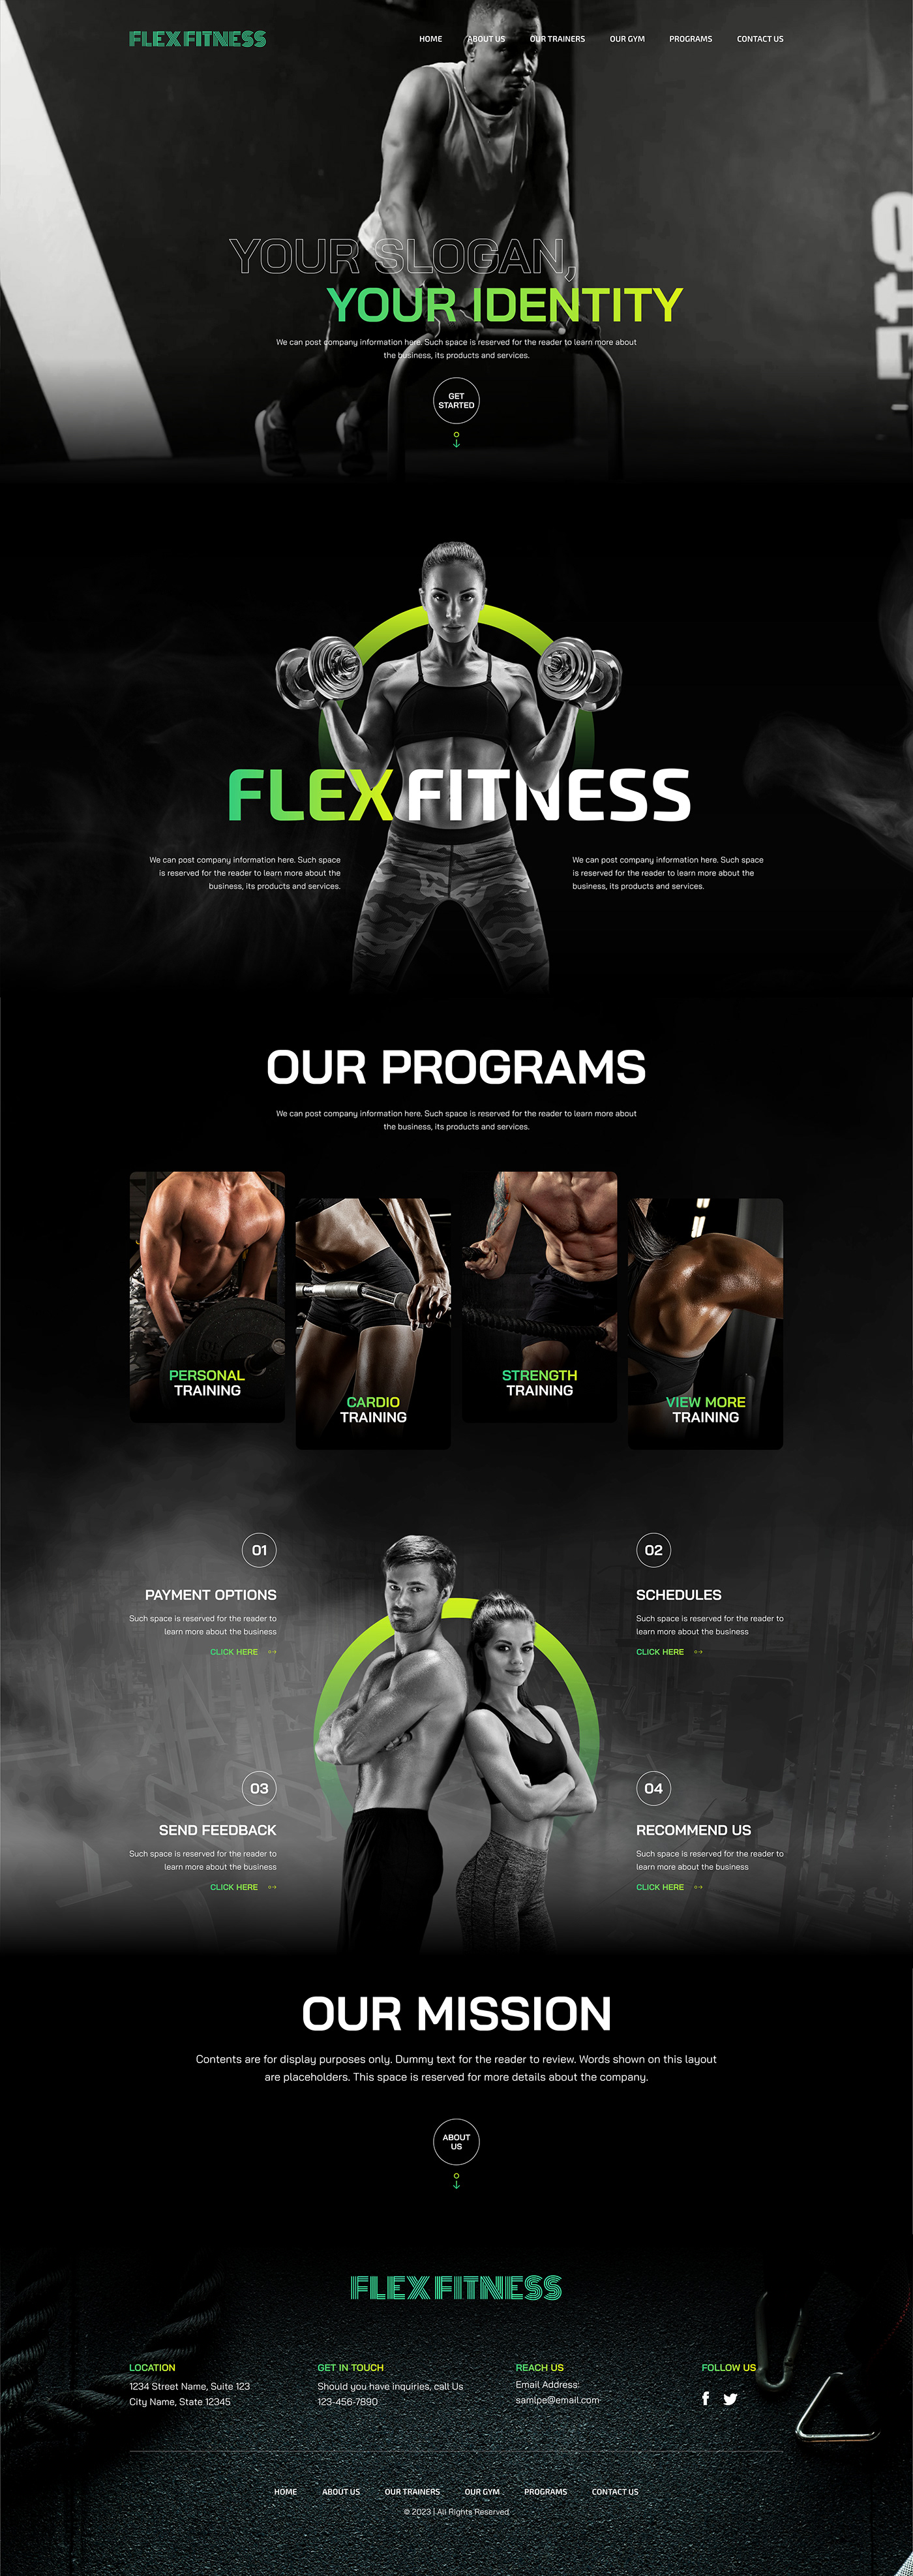 Fitness Home Page
- mockup only
- google fonts used
- created from the scratch